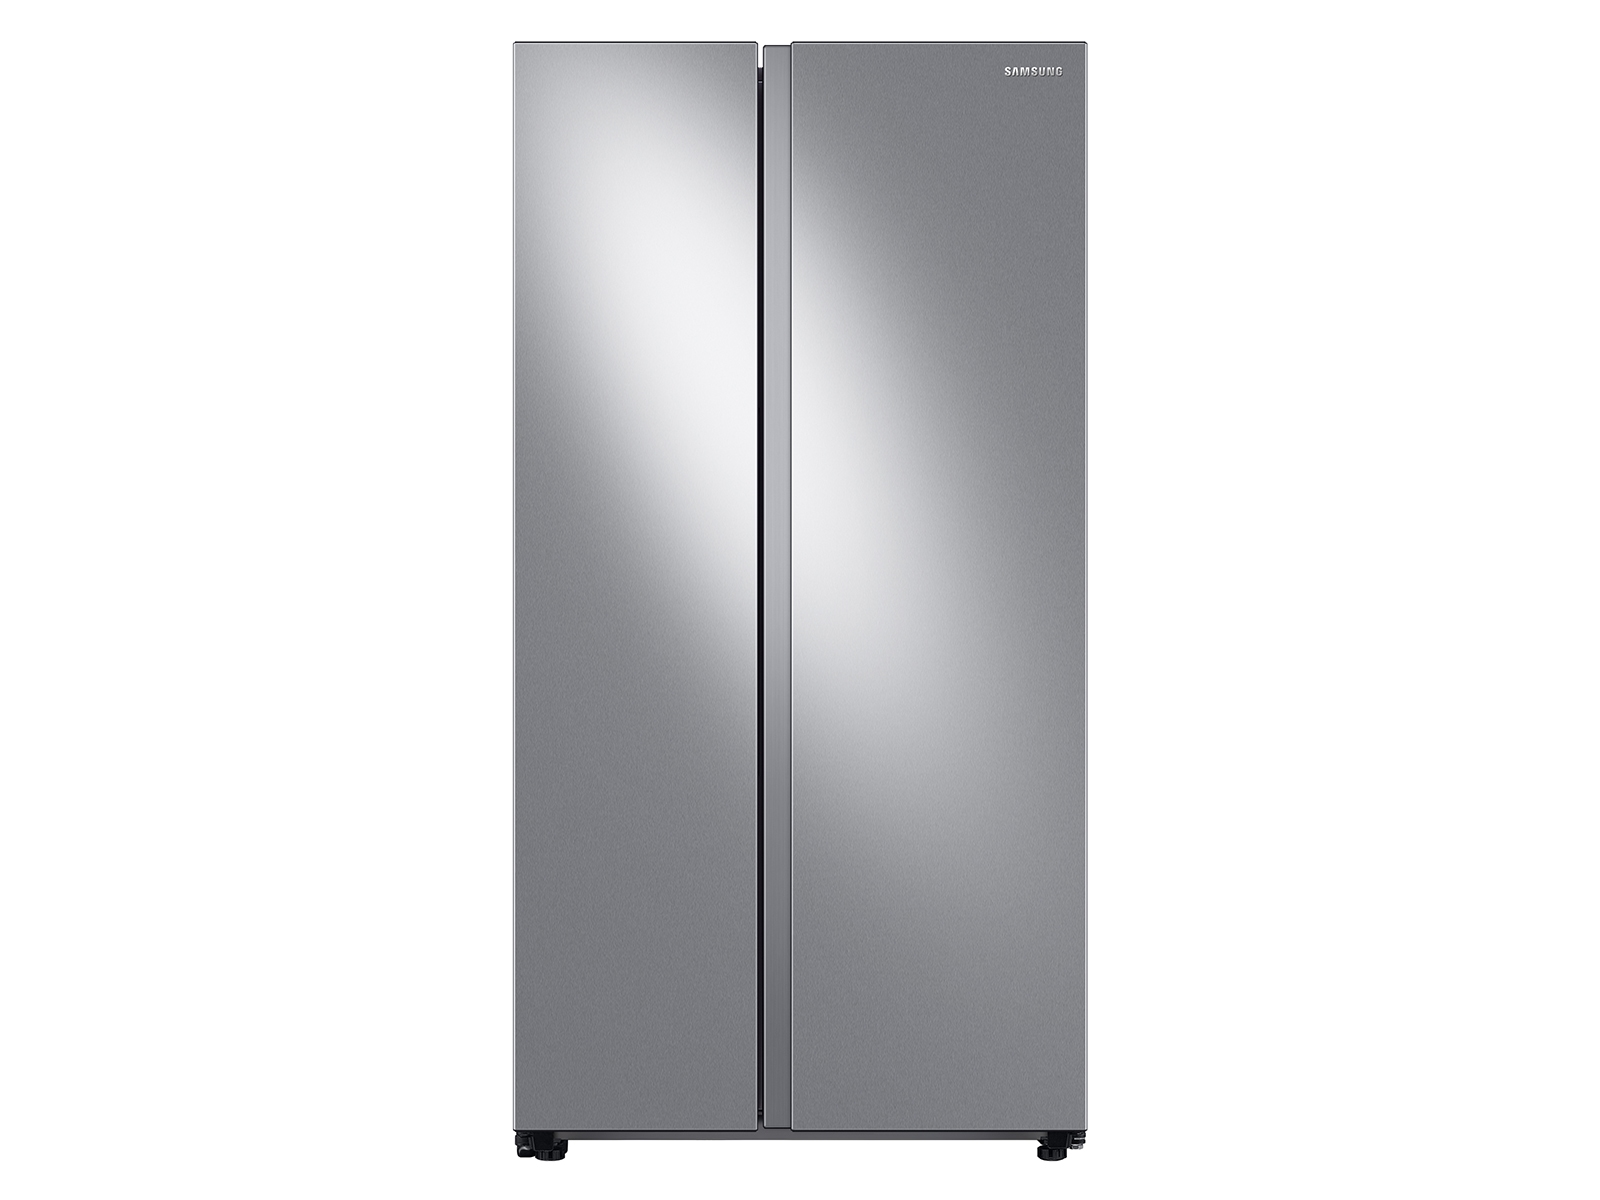 Photos - Fridge Samsung 28 cu. ft. Smart Side-by-Side Refrigerator in Silver(RS28A500ASR/A 